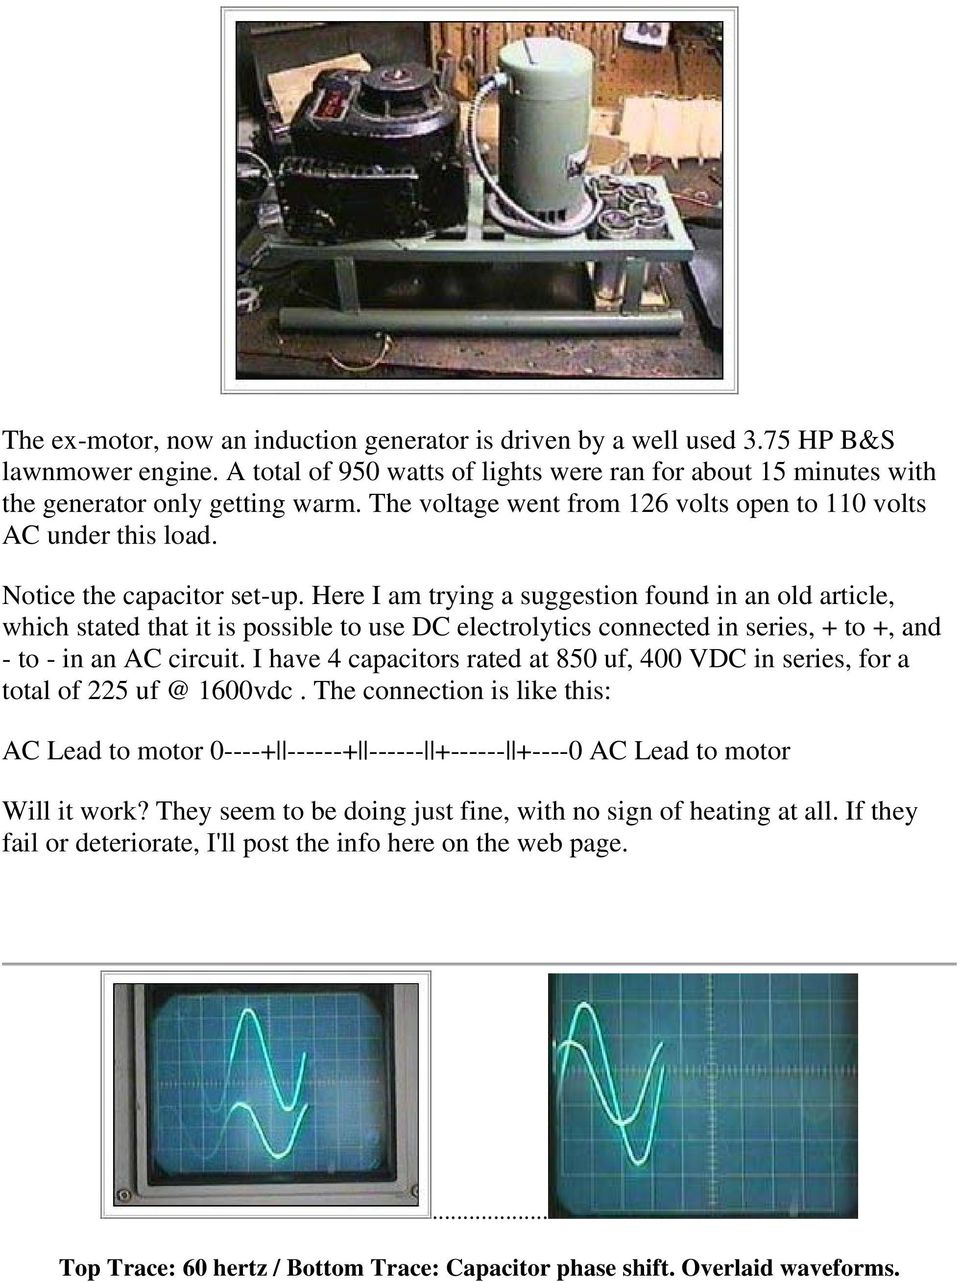 Here I am trying a suggestion found in an old article, which stated that it is possible to use DC electrolytics connected in series, + to +, and - to - in an AC circuit.